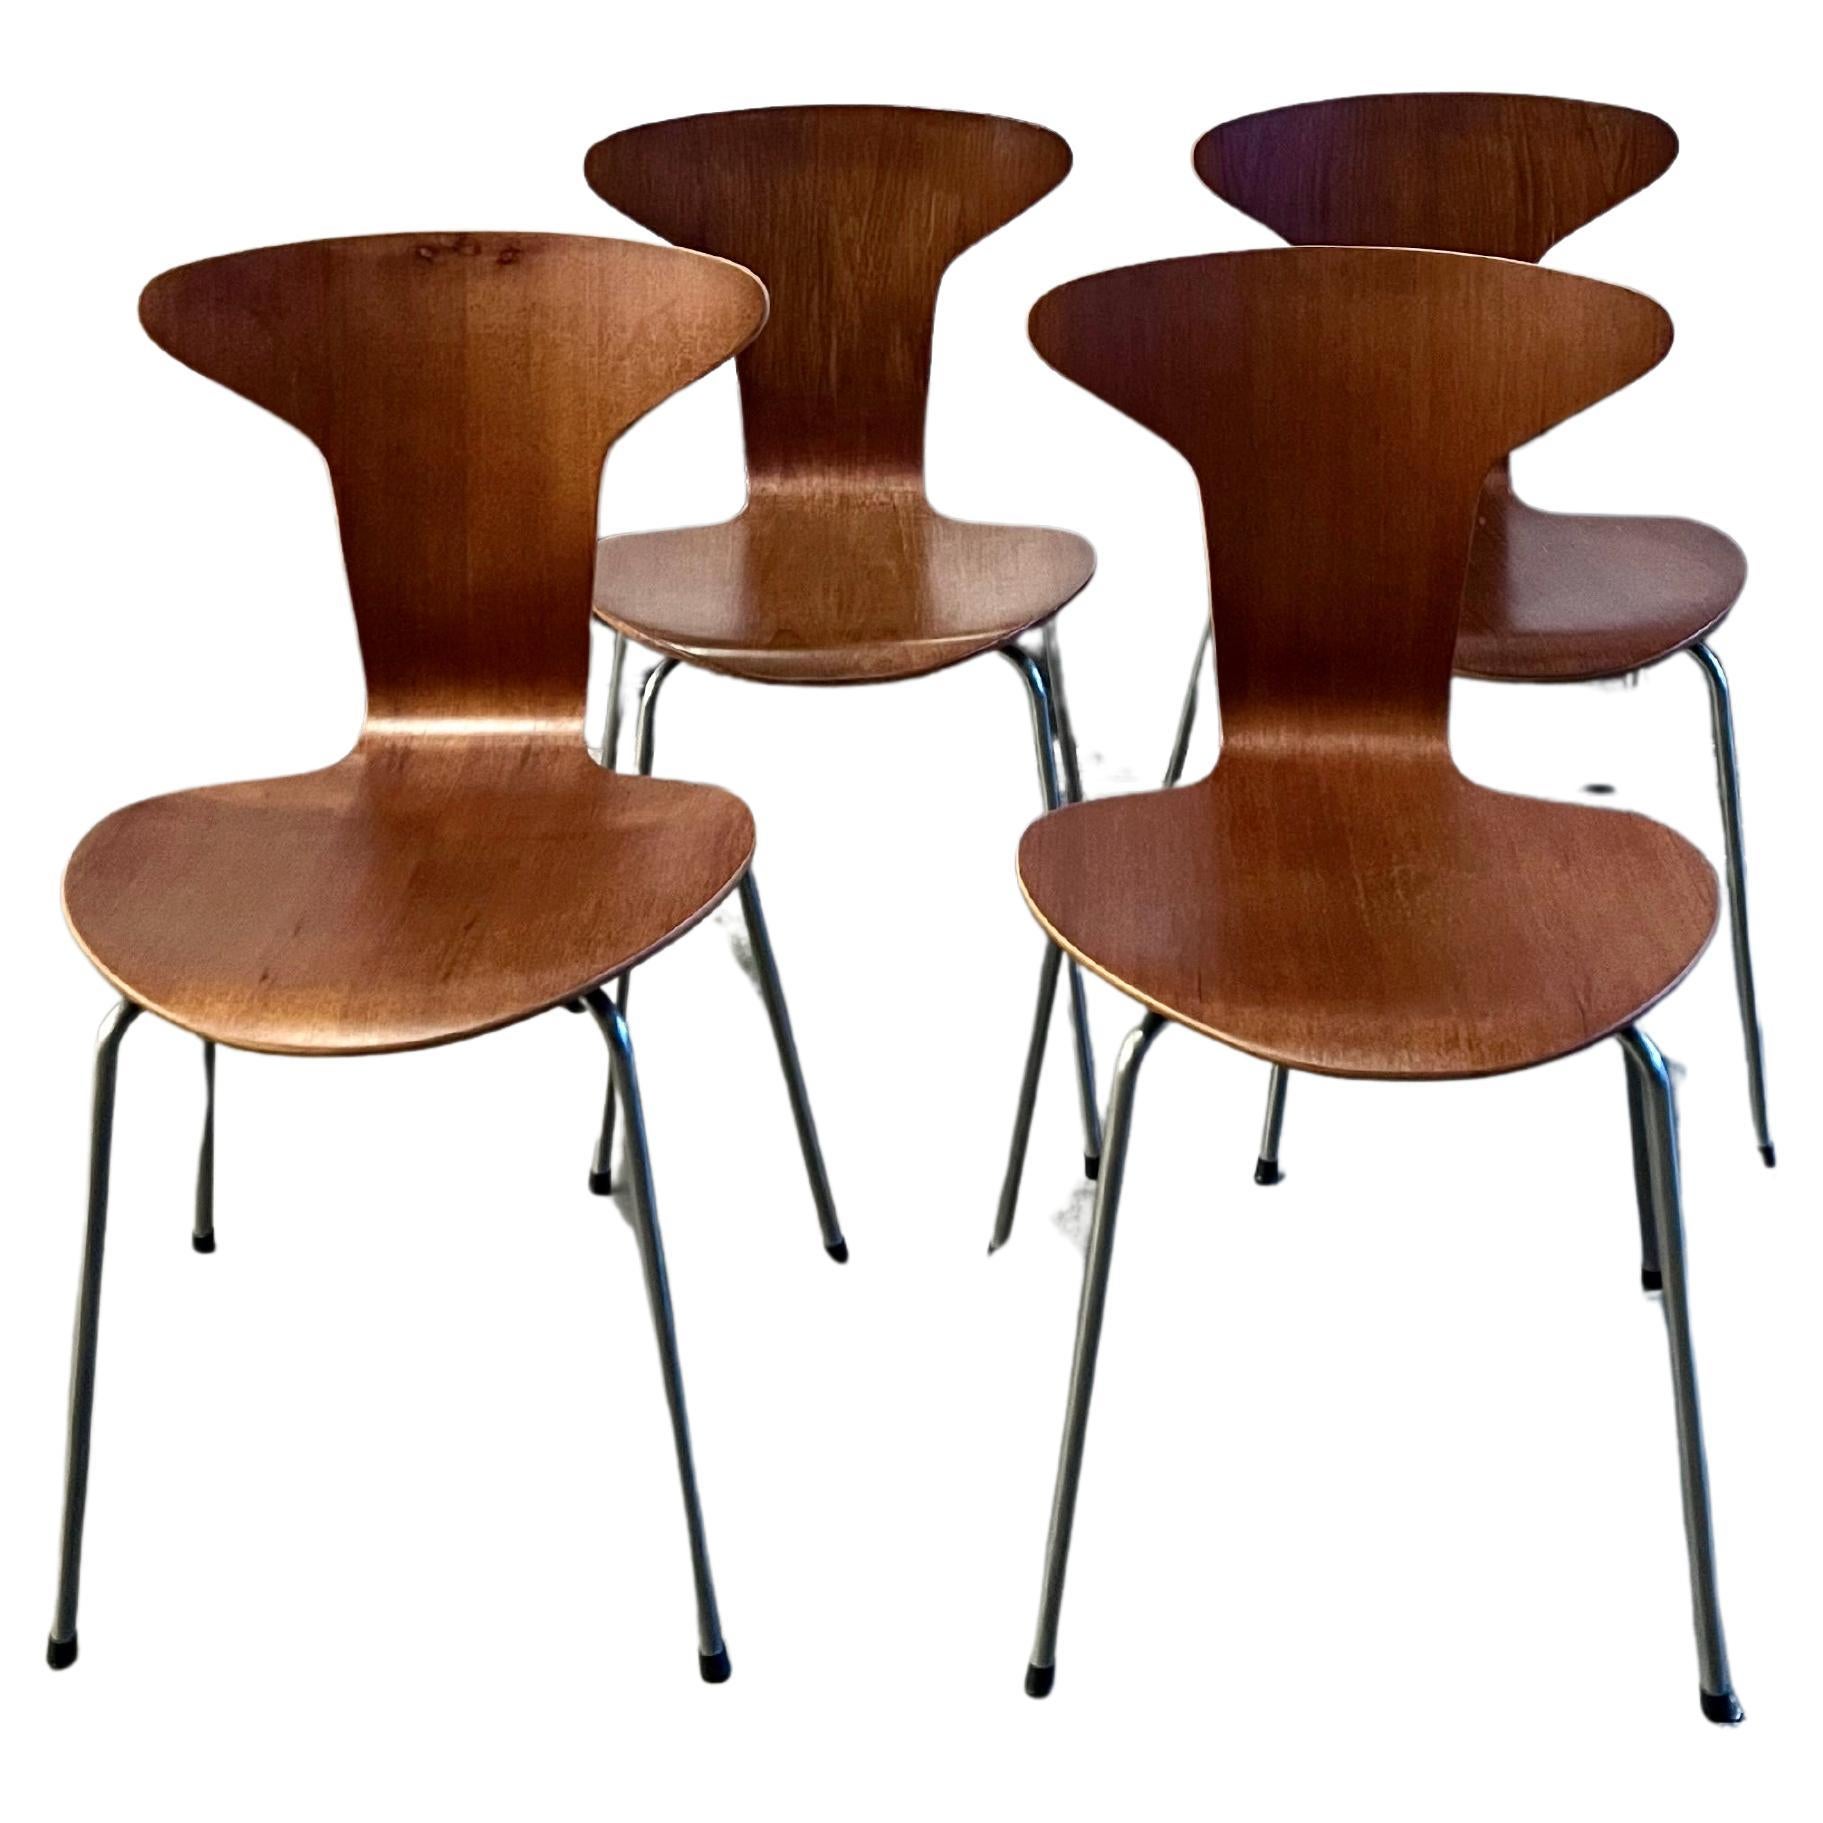 4 Early dining chairs by Arne Jacobsen for Fritz Hansen, 1957 For Sale